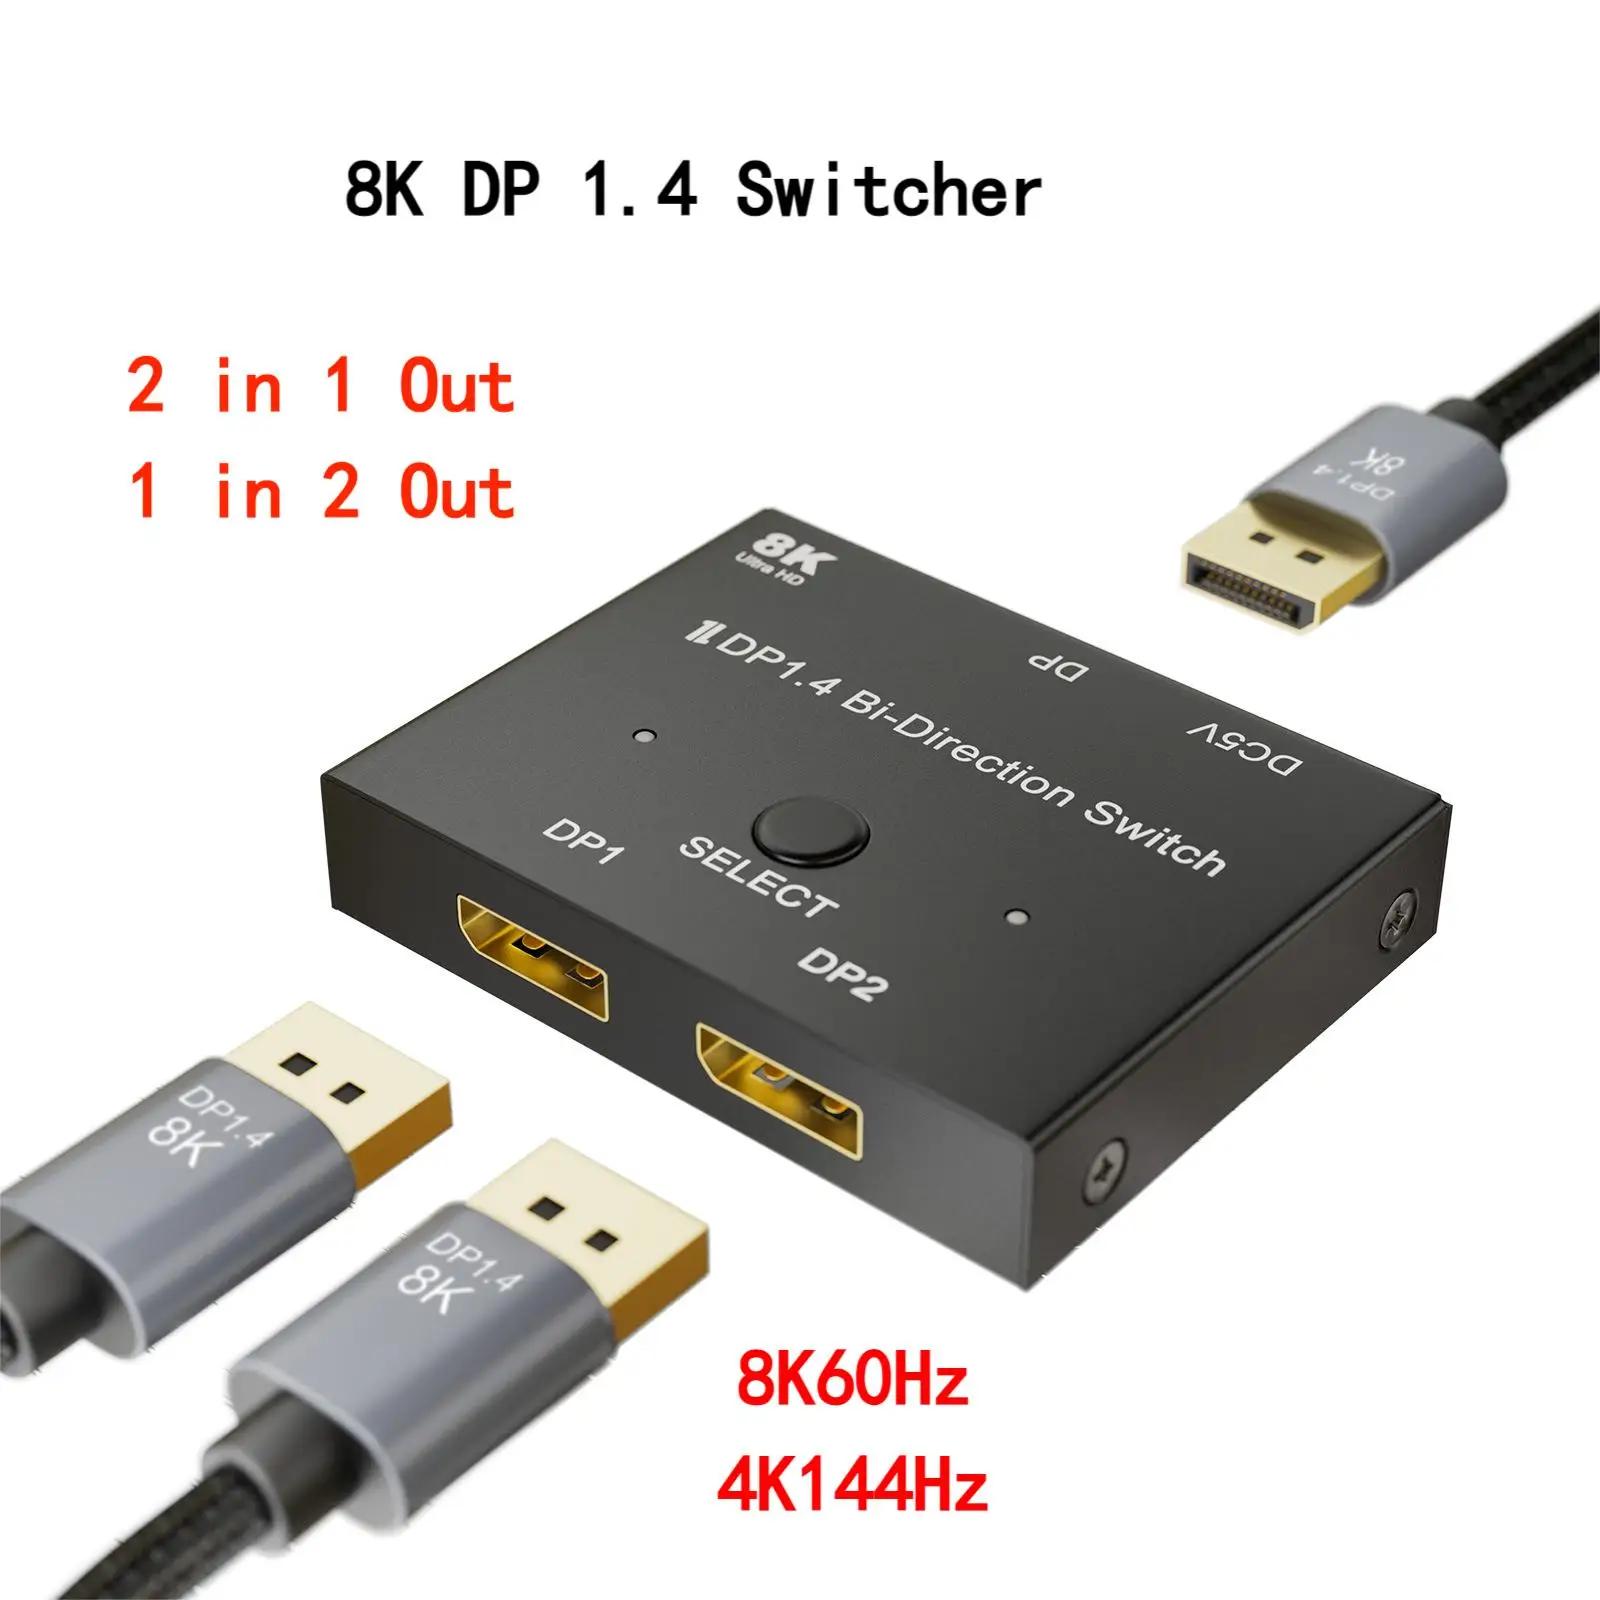 DP 1.4 ġ ø,  ÷ Ʈ ó, 2 in 1 Out, 1 in 2 Out, 8K 4K  , 32.4Gbps  